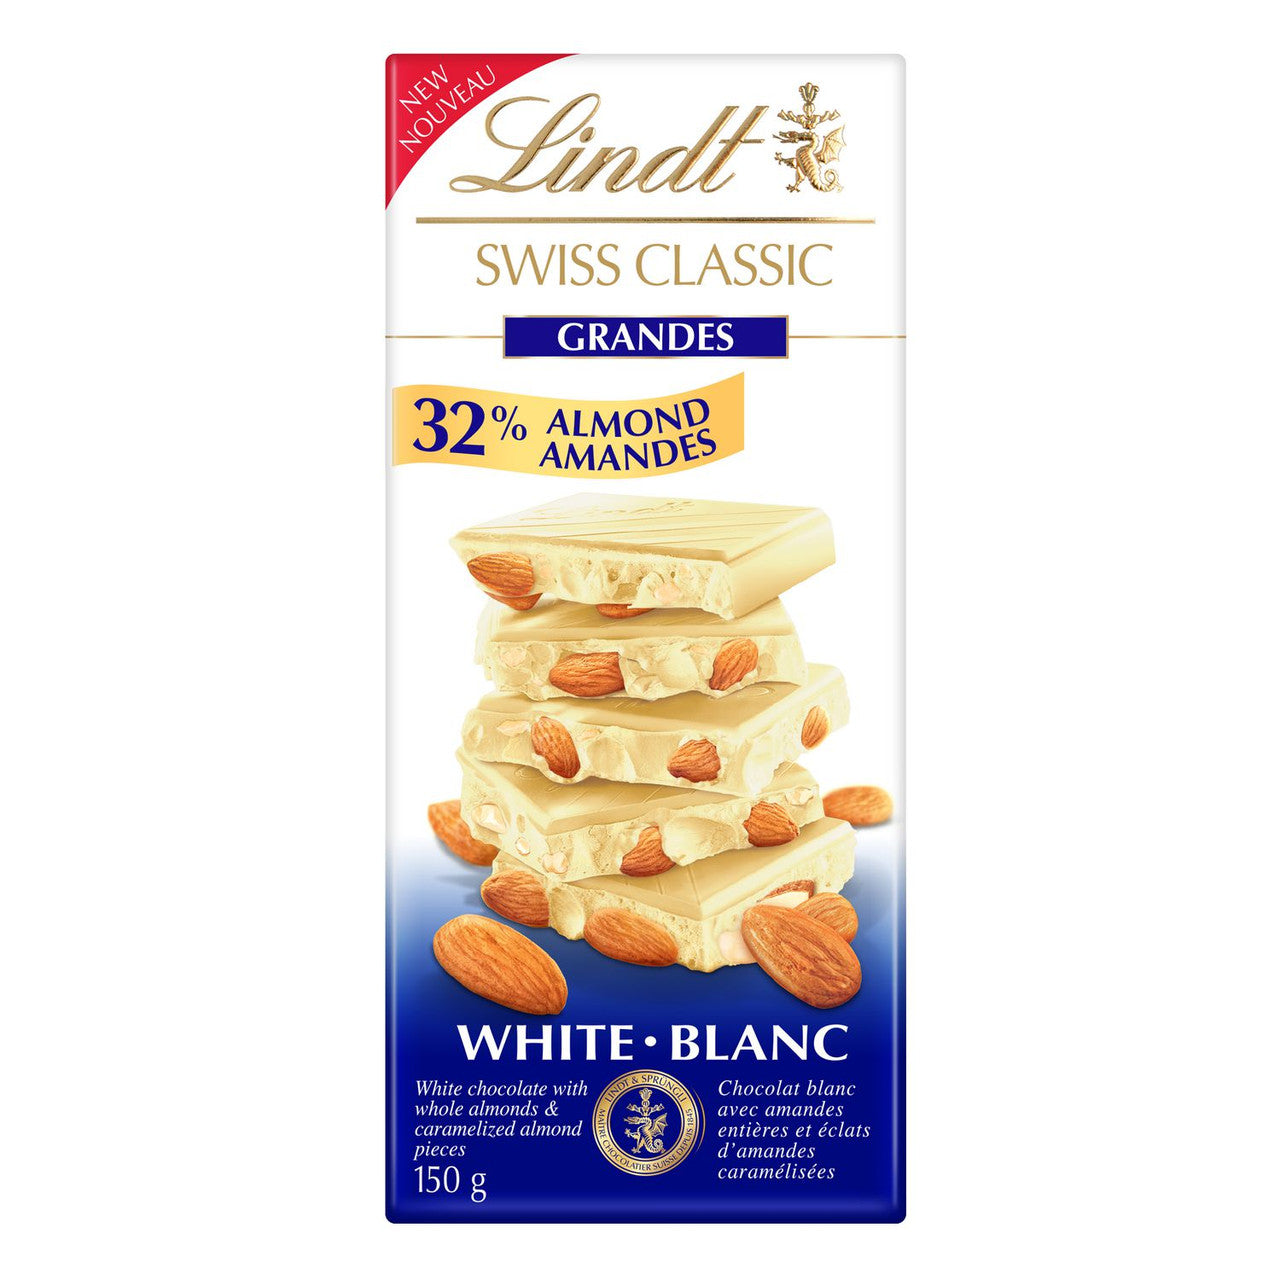 Lindt Swiss Classic Grandes Almond White Chocolate Bar, 150g/5.2 oz. {Imported from Canada}